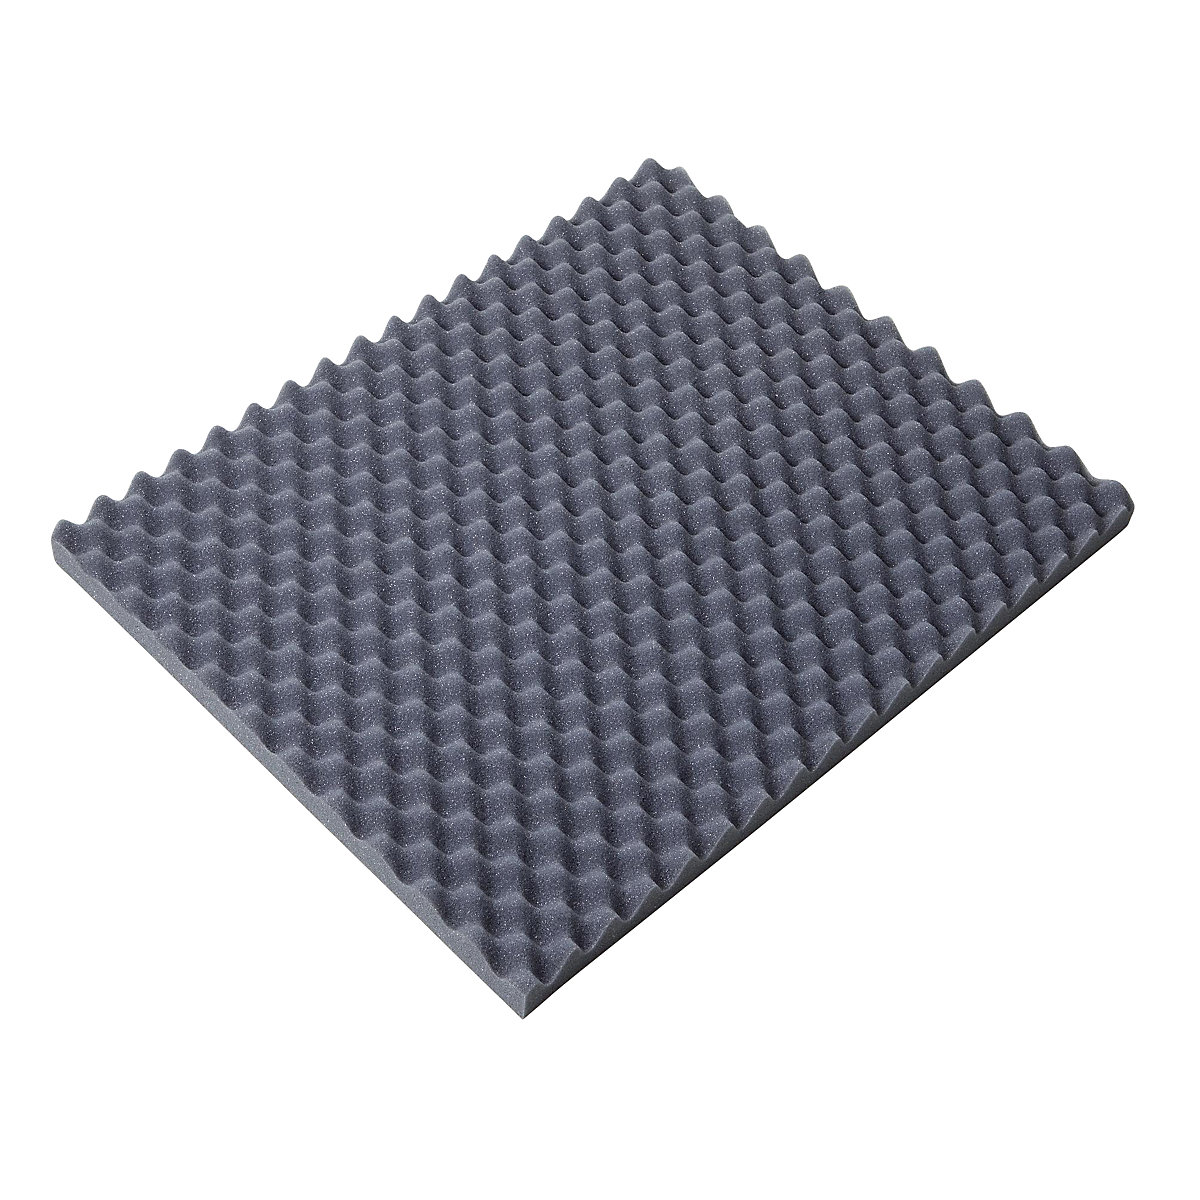 Egg crate foam sheet, 40 mm thick, LxW 500 x 400 mm, pack of 26, 3+ packs-7